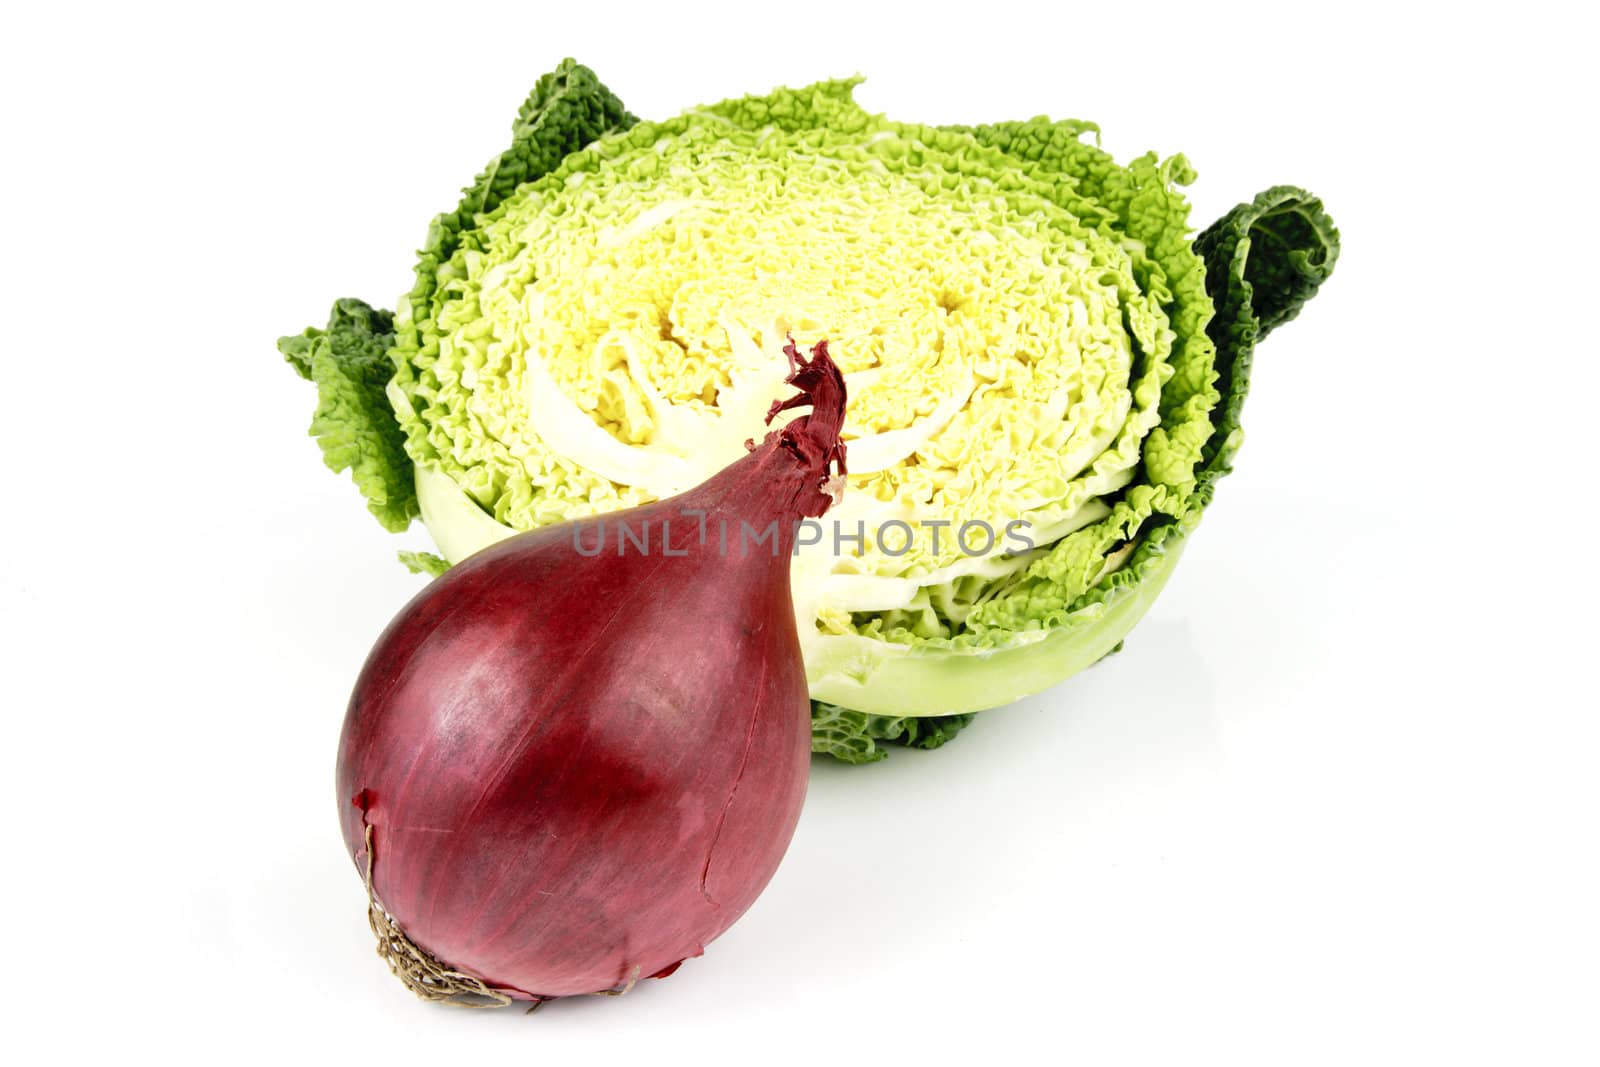 Half a raw green cabbage with a single raw red onion  on a reflective white background